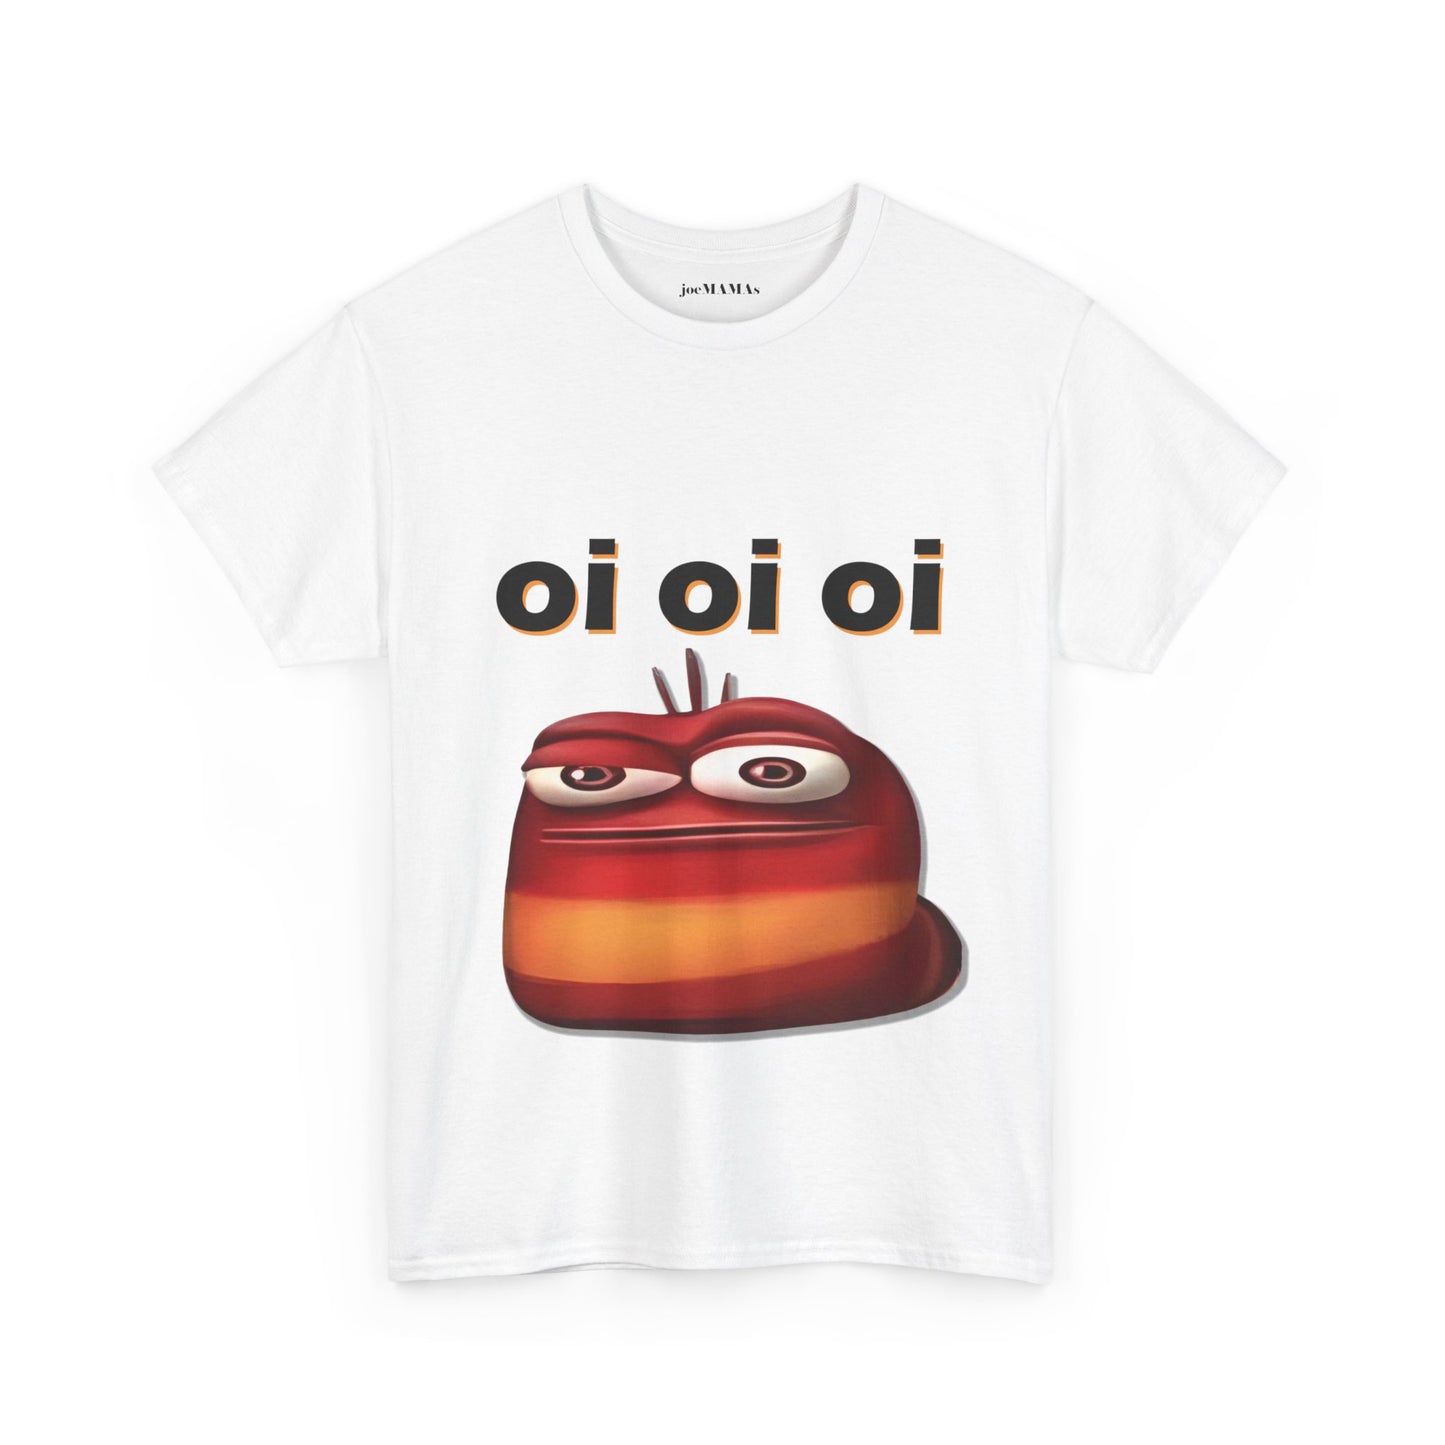 oh, oh, oh, T-Shirt